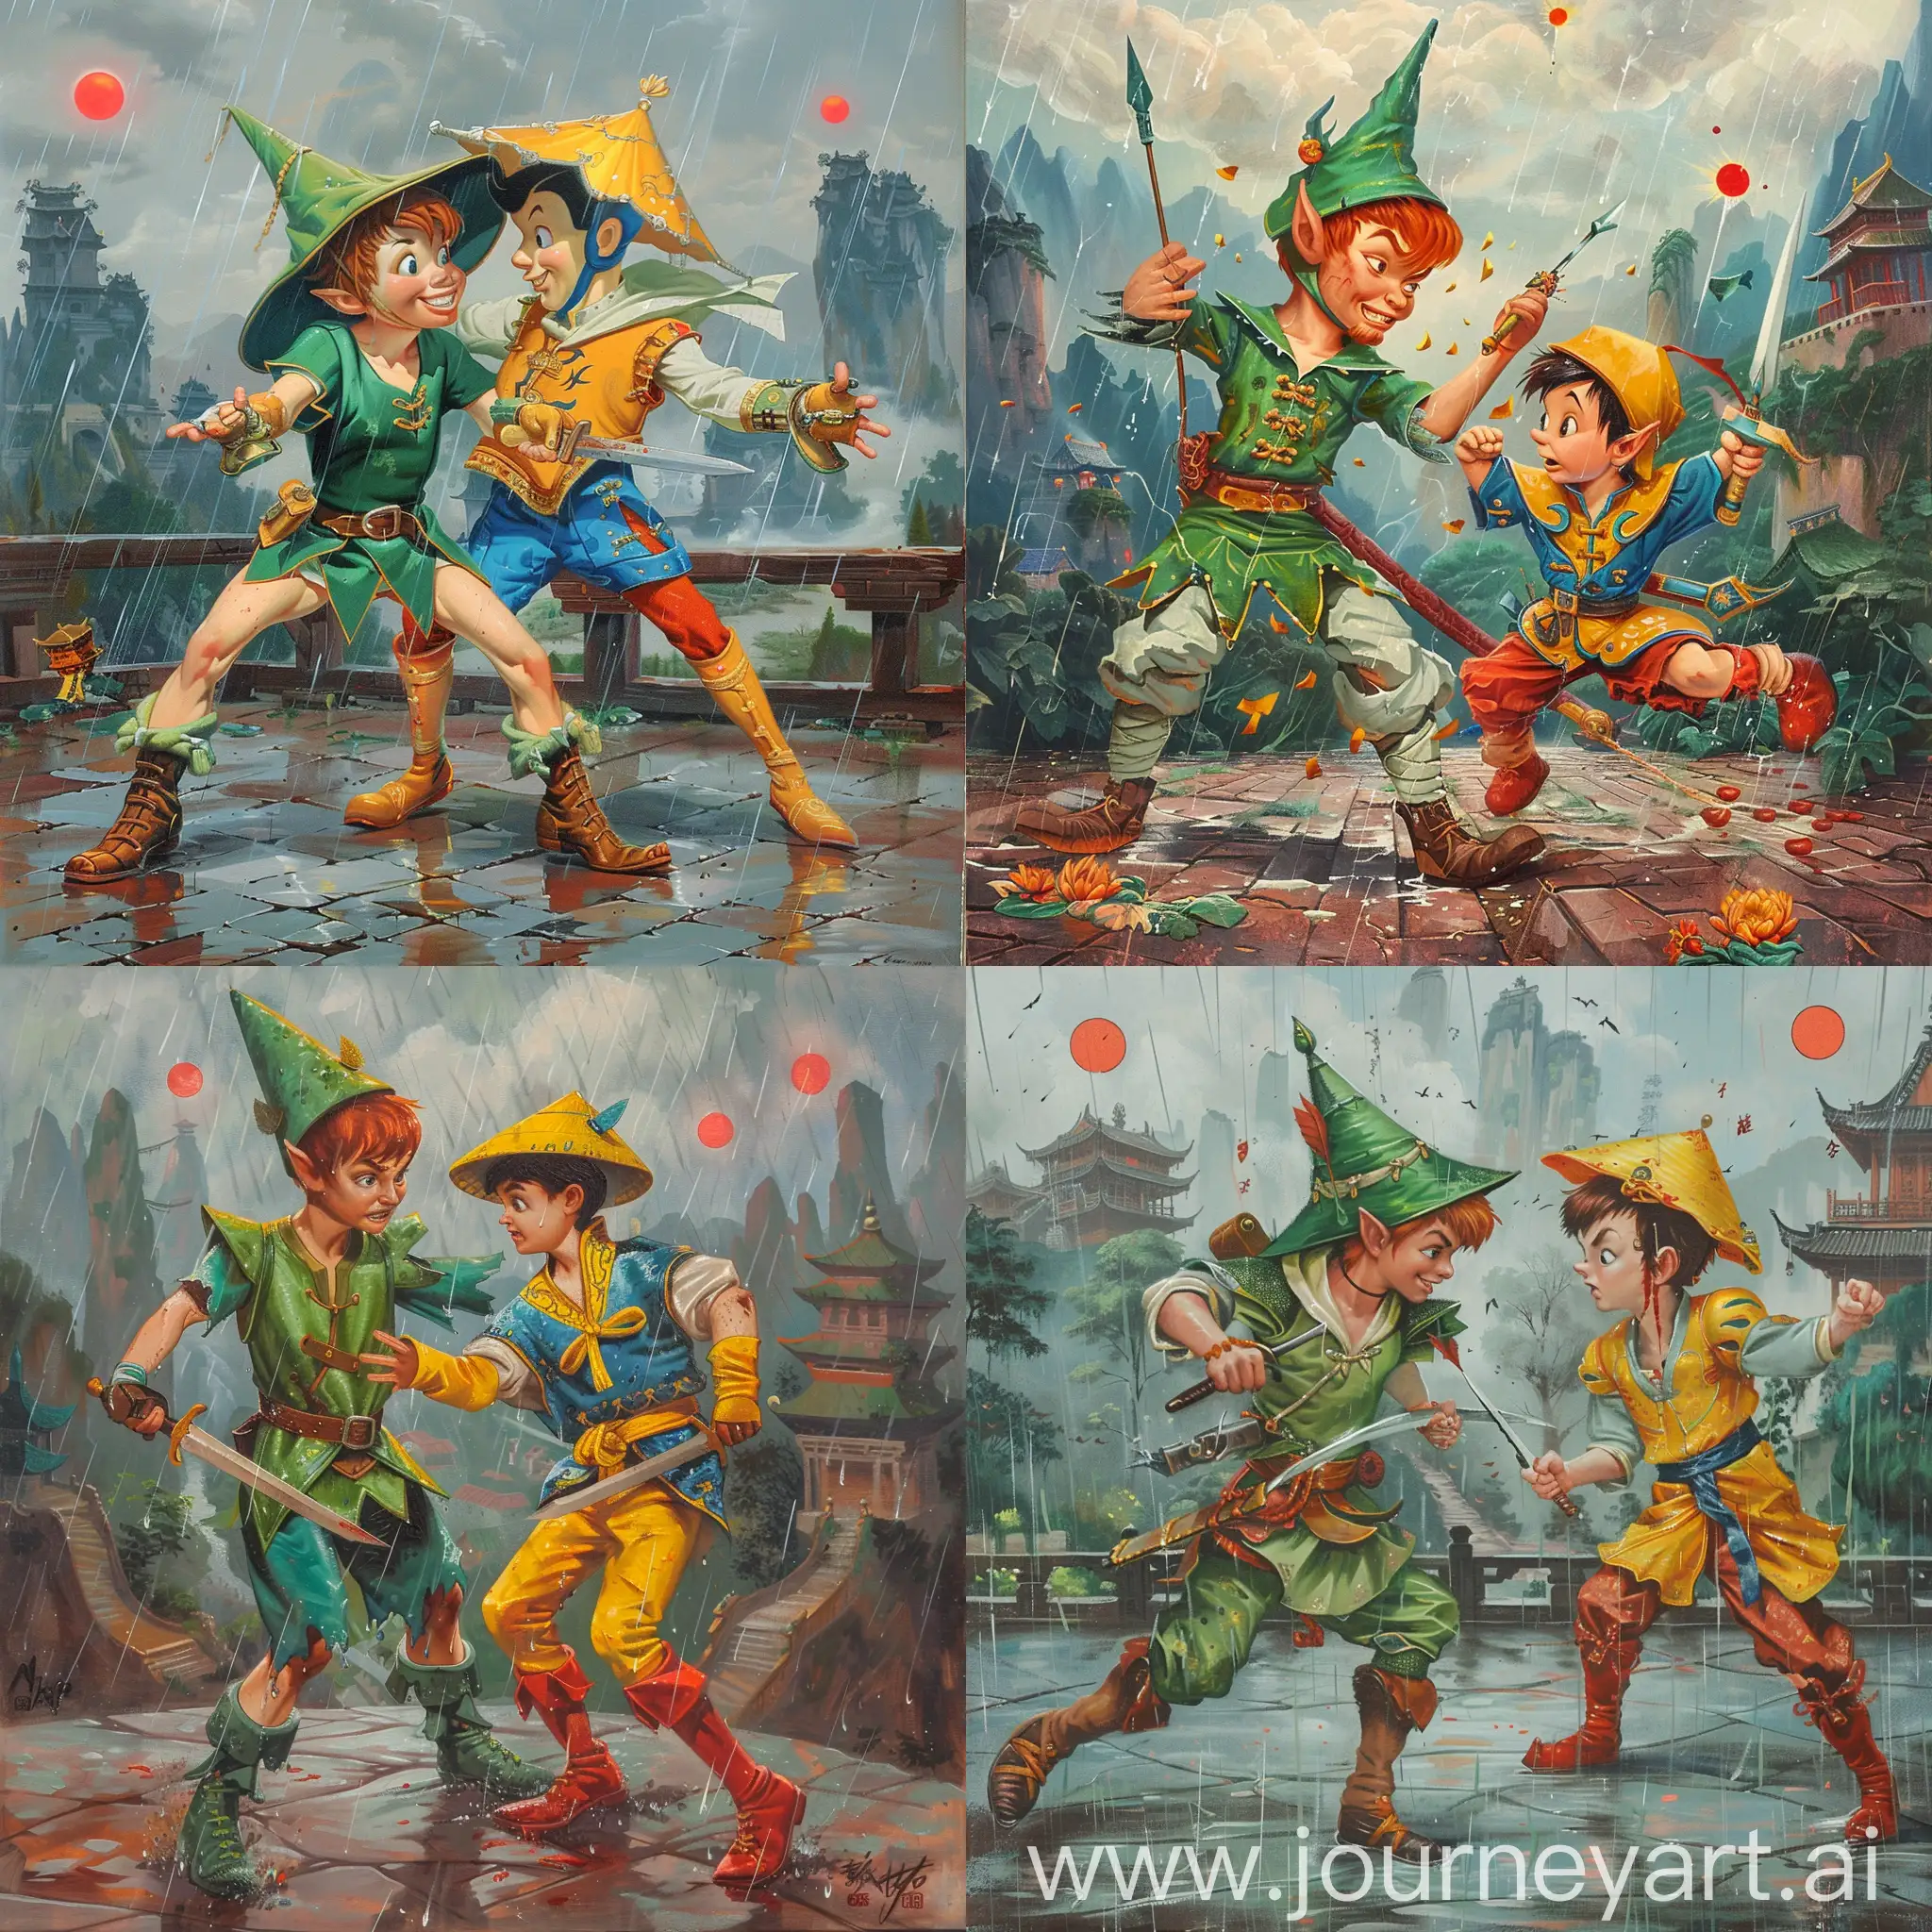 Historic painting style:

a Disney handsome Peter Pan, from the Peter Pan cartoon, with orange brown hair,

he wears a green Chinese conic hat, deep green and light green colors Chinese style medieval armor and boots,

a Disney handsome Pinocchio, from the Pinocchio cartoon, he has yellow Chinese conic hat, he wears yellow and blue color Chinese style medieval armor, red pants and boots, 

they both hold their Chinese daggers to fight against each other.

Chinese Luoyang Buddist Longmen Grottoes as background, and three small red suns in rainy sky.